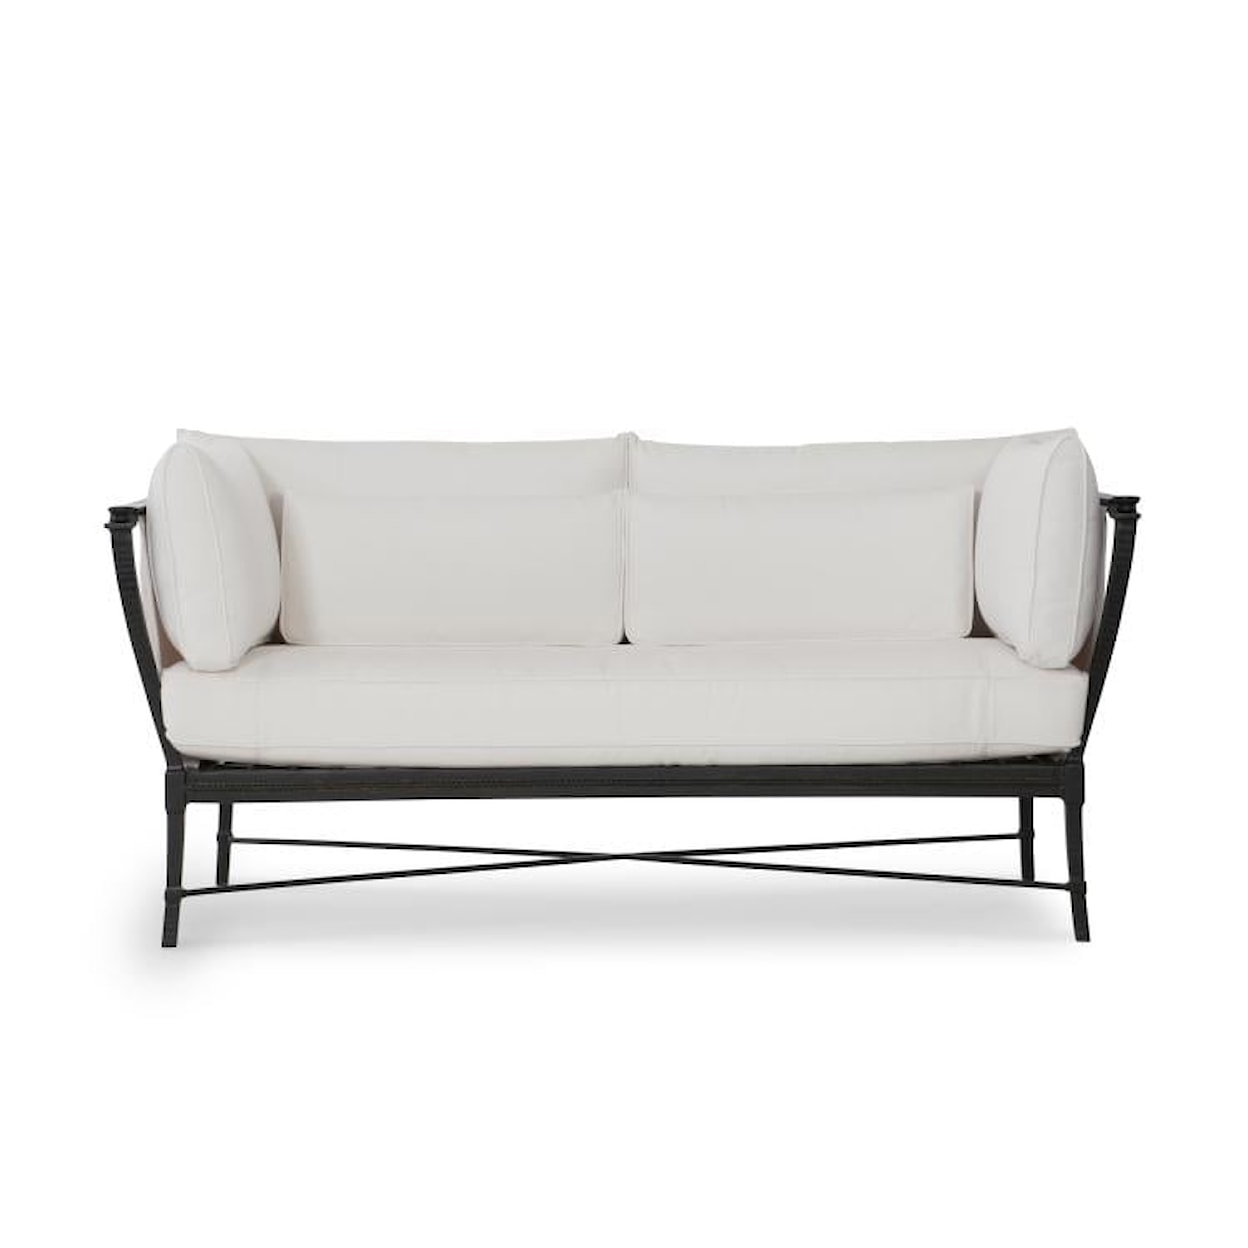 Century Andalusia Outdoor Loveseat